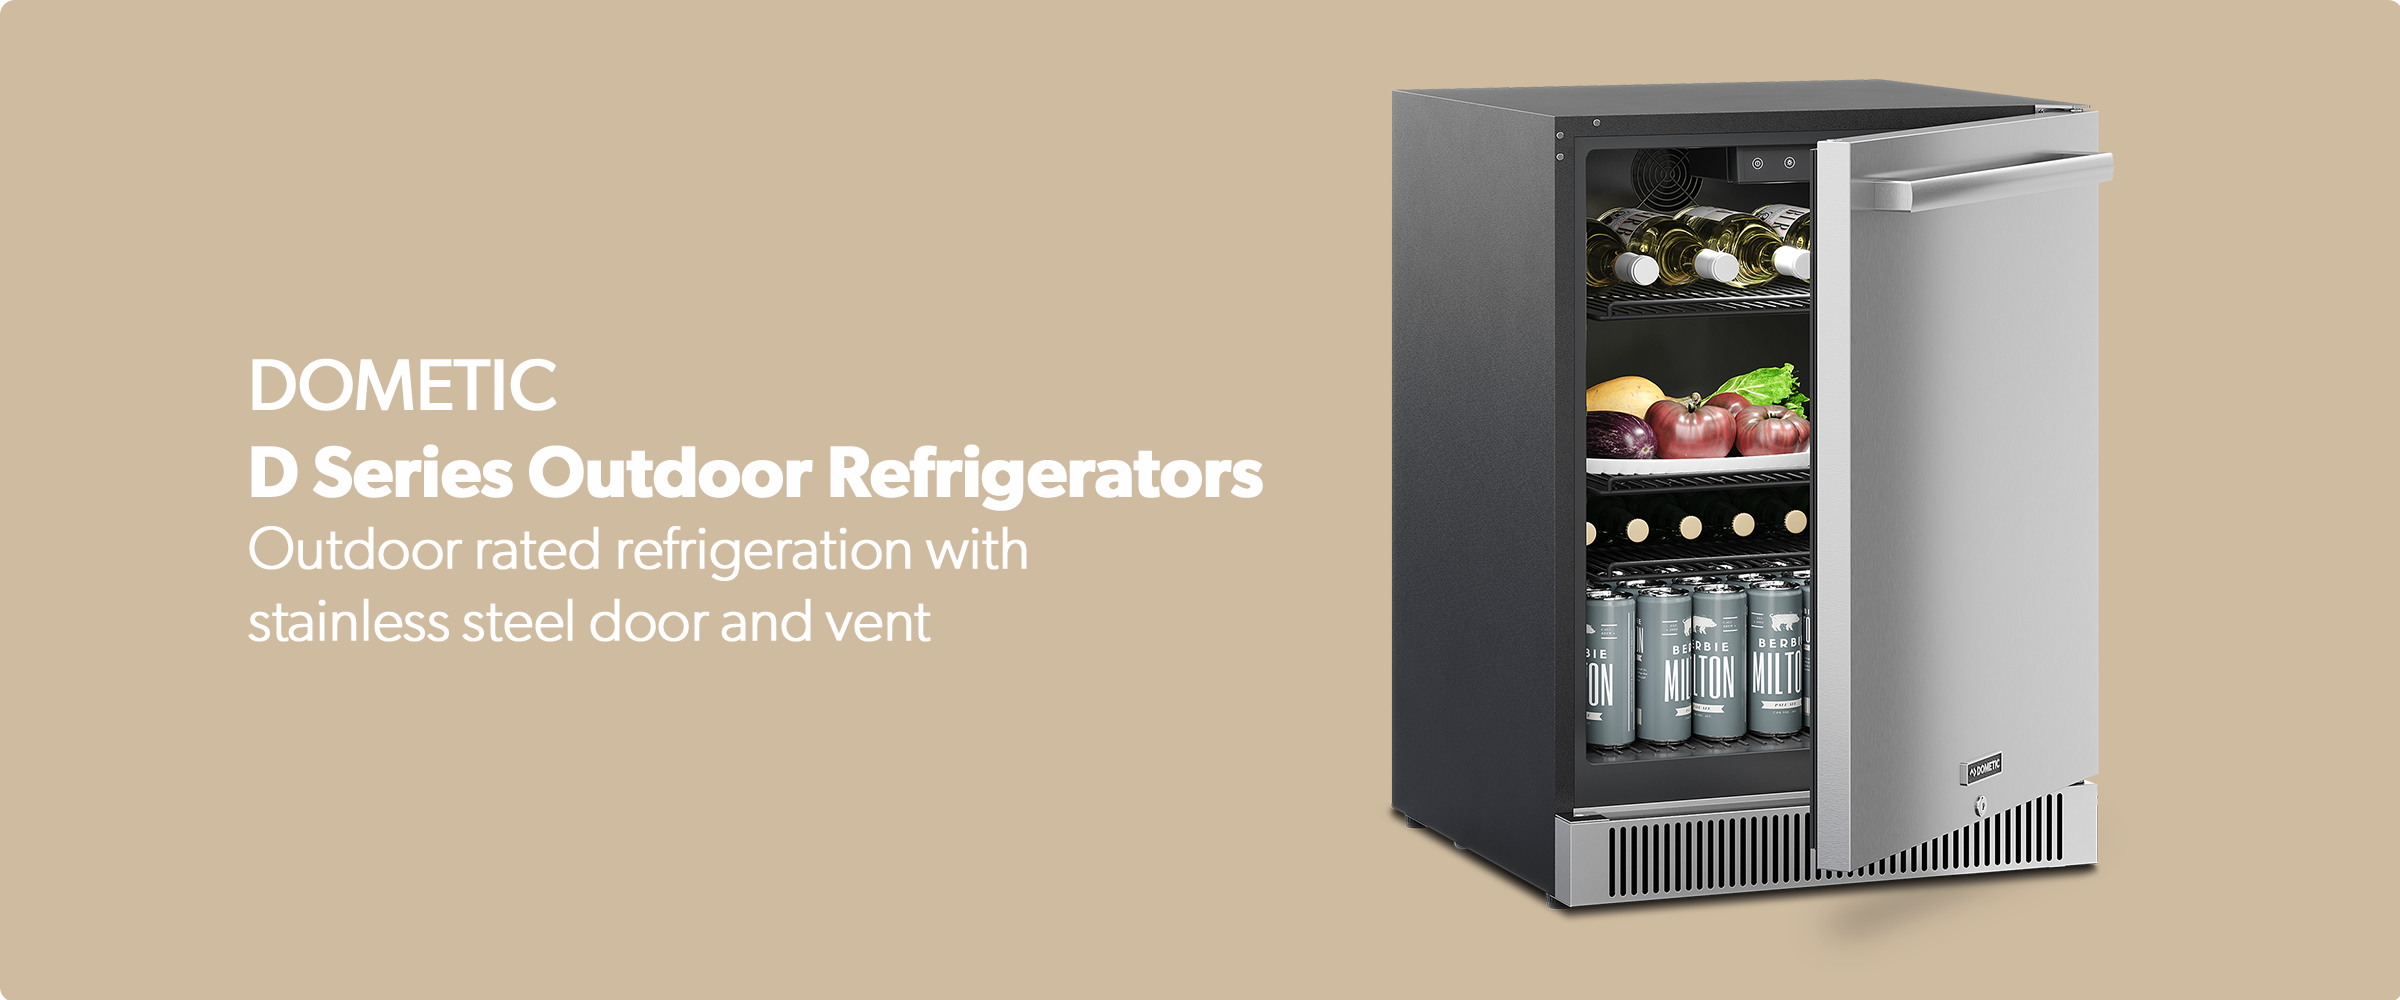 Dometic 24-Inch Outdoor Refrigerator - DE24F - The Outdoor Appliance Store